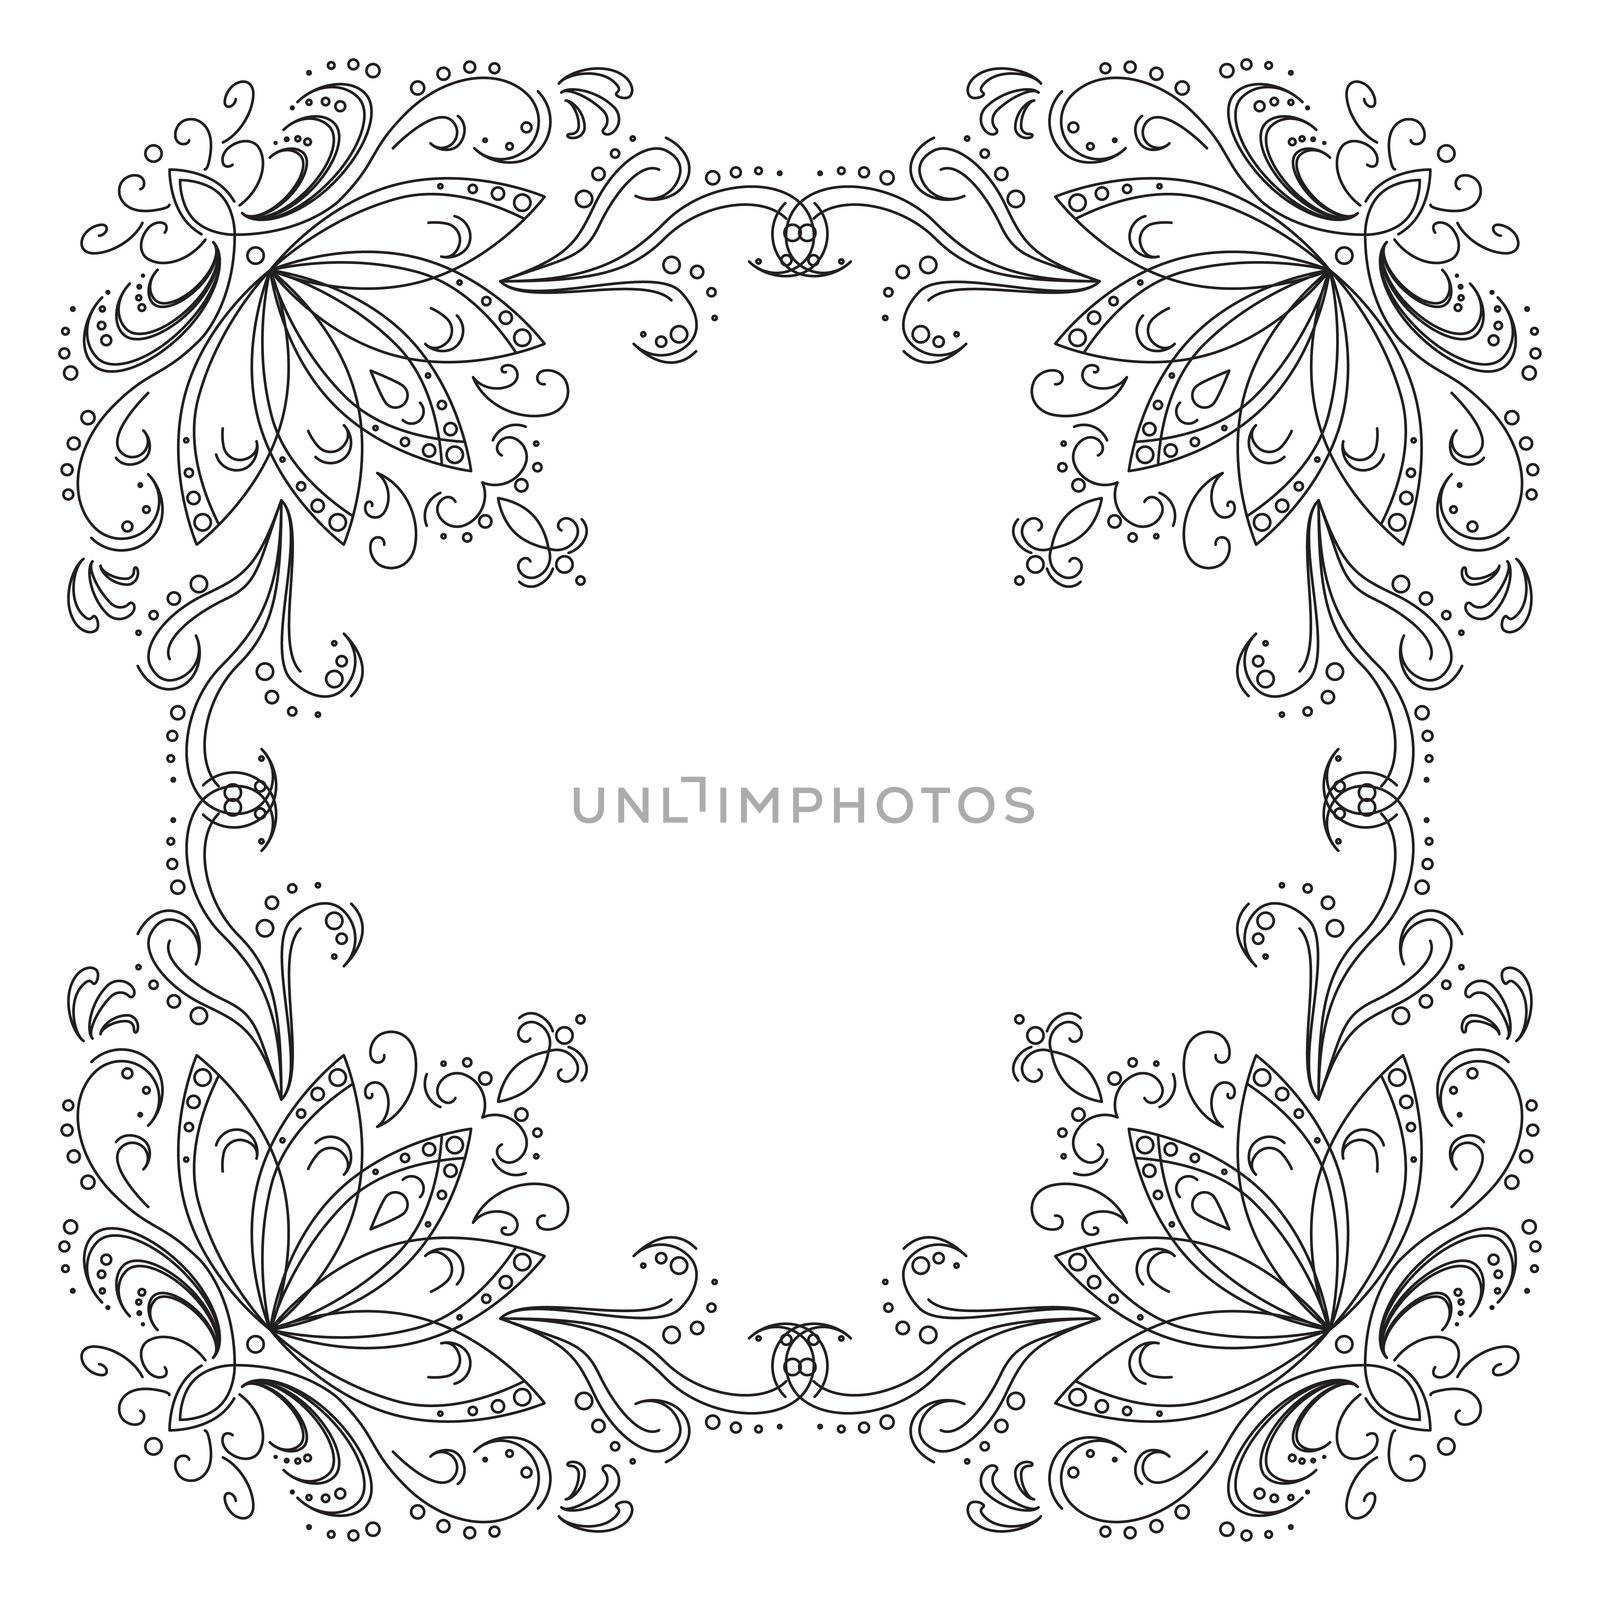 Abstract background with graphic floral pattern, monochrome contours